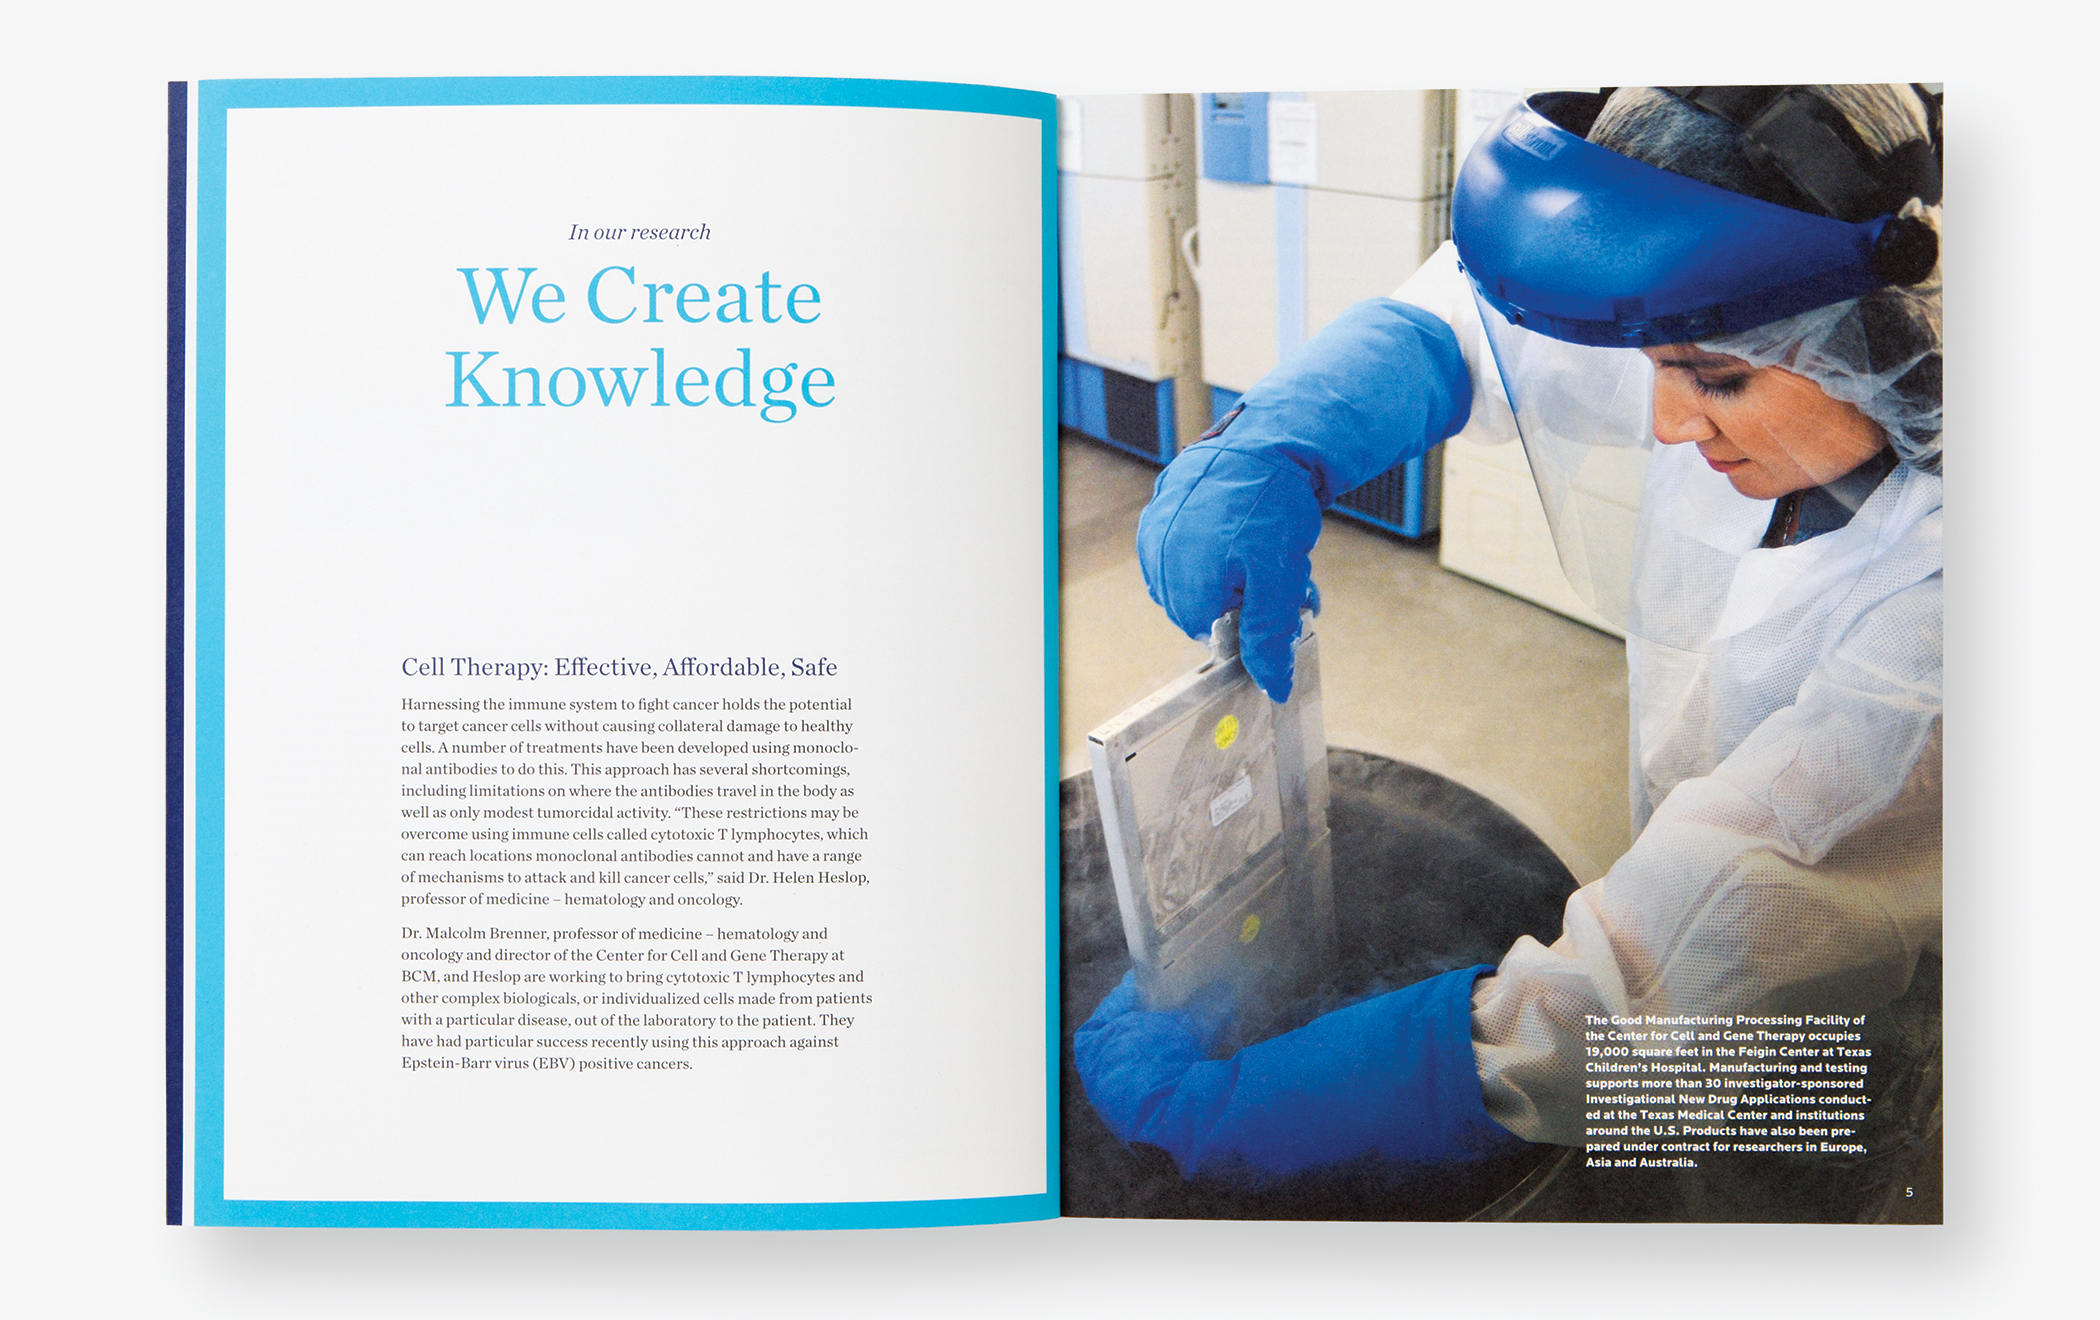 Pages from The BCM Report with the title "We Create Knowledge" and image of woman working in Center for Cell and Gene Therapy.